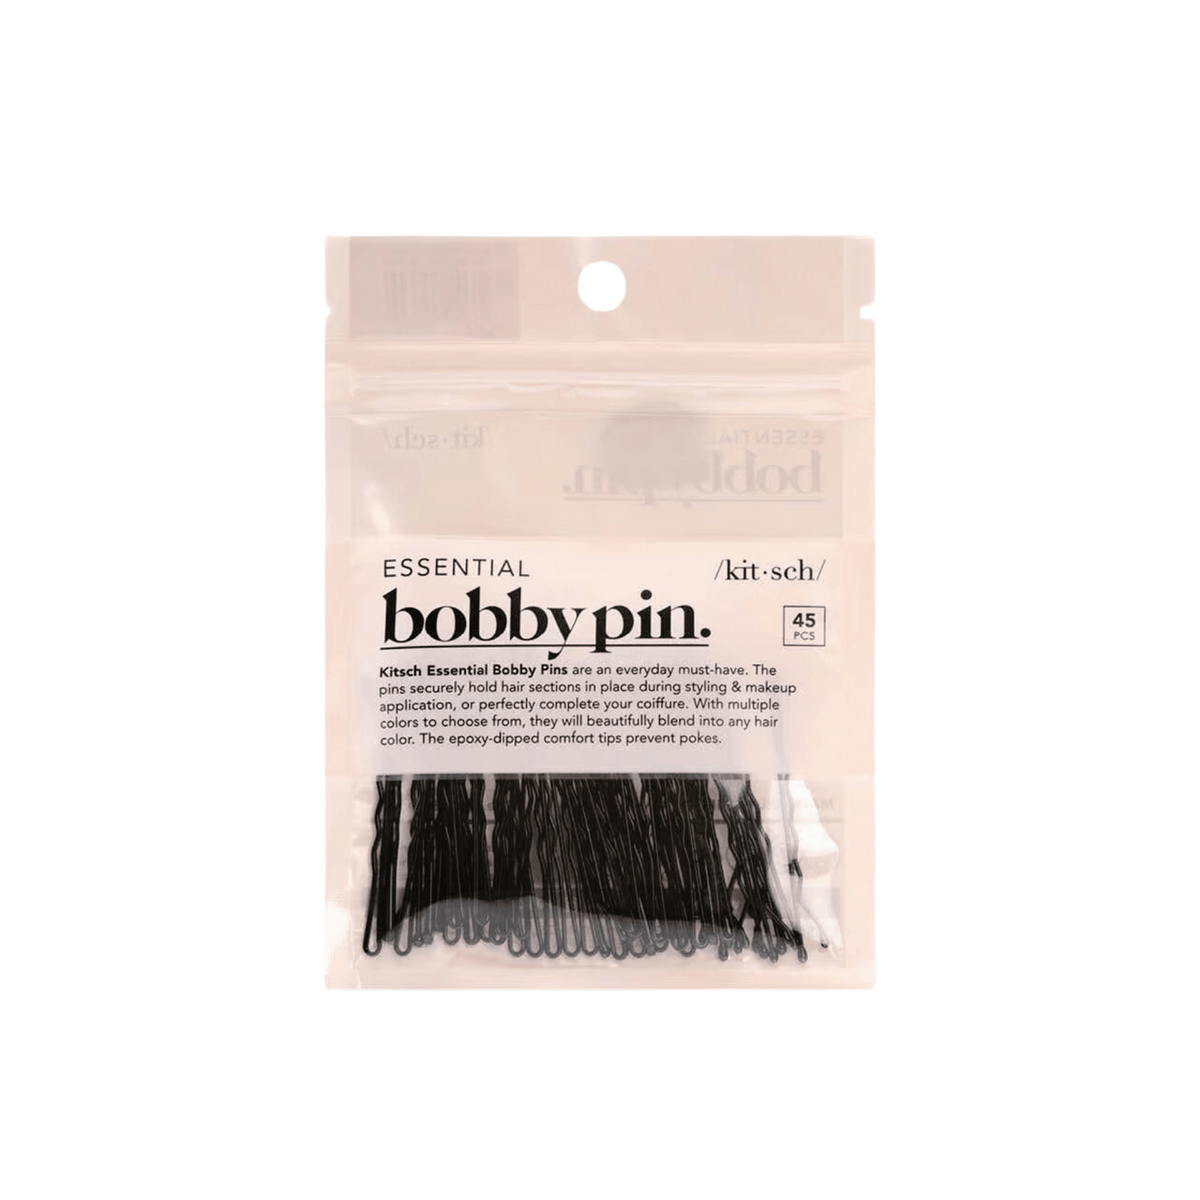 Primary Image of Black Bobby Pins